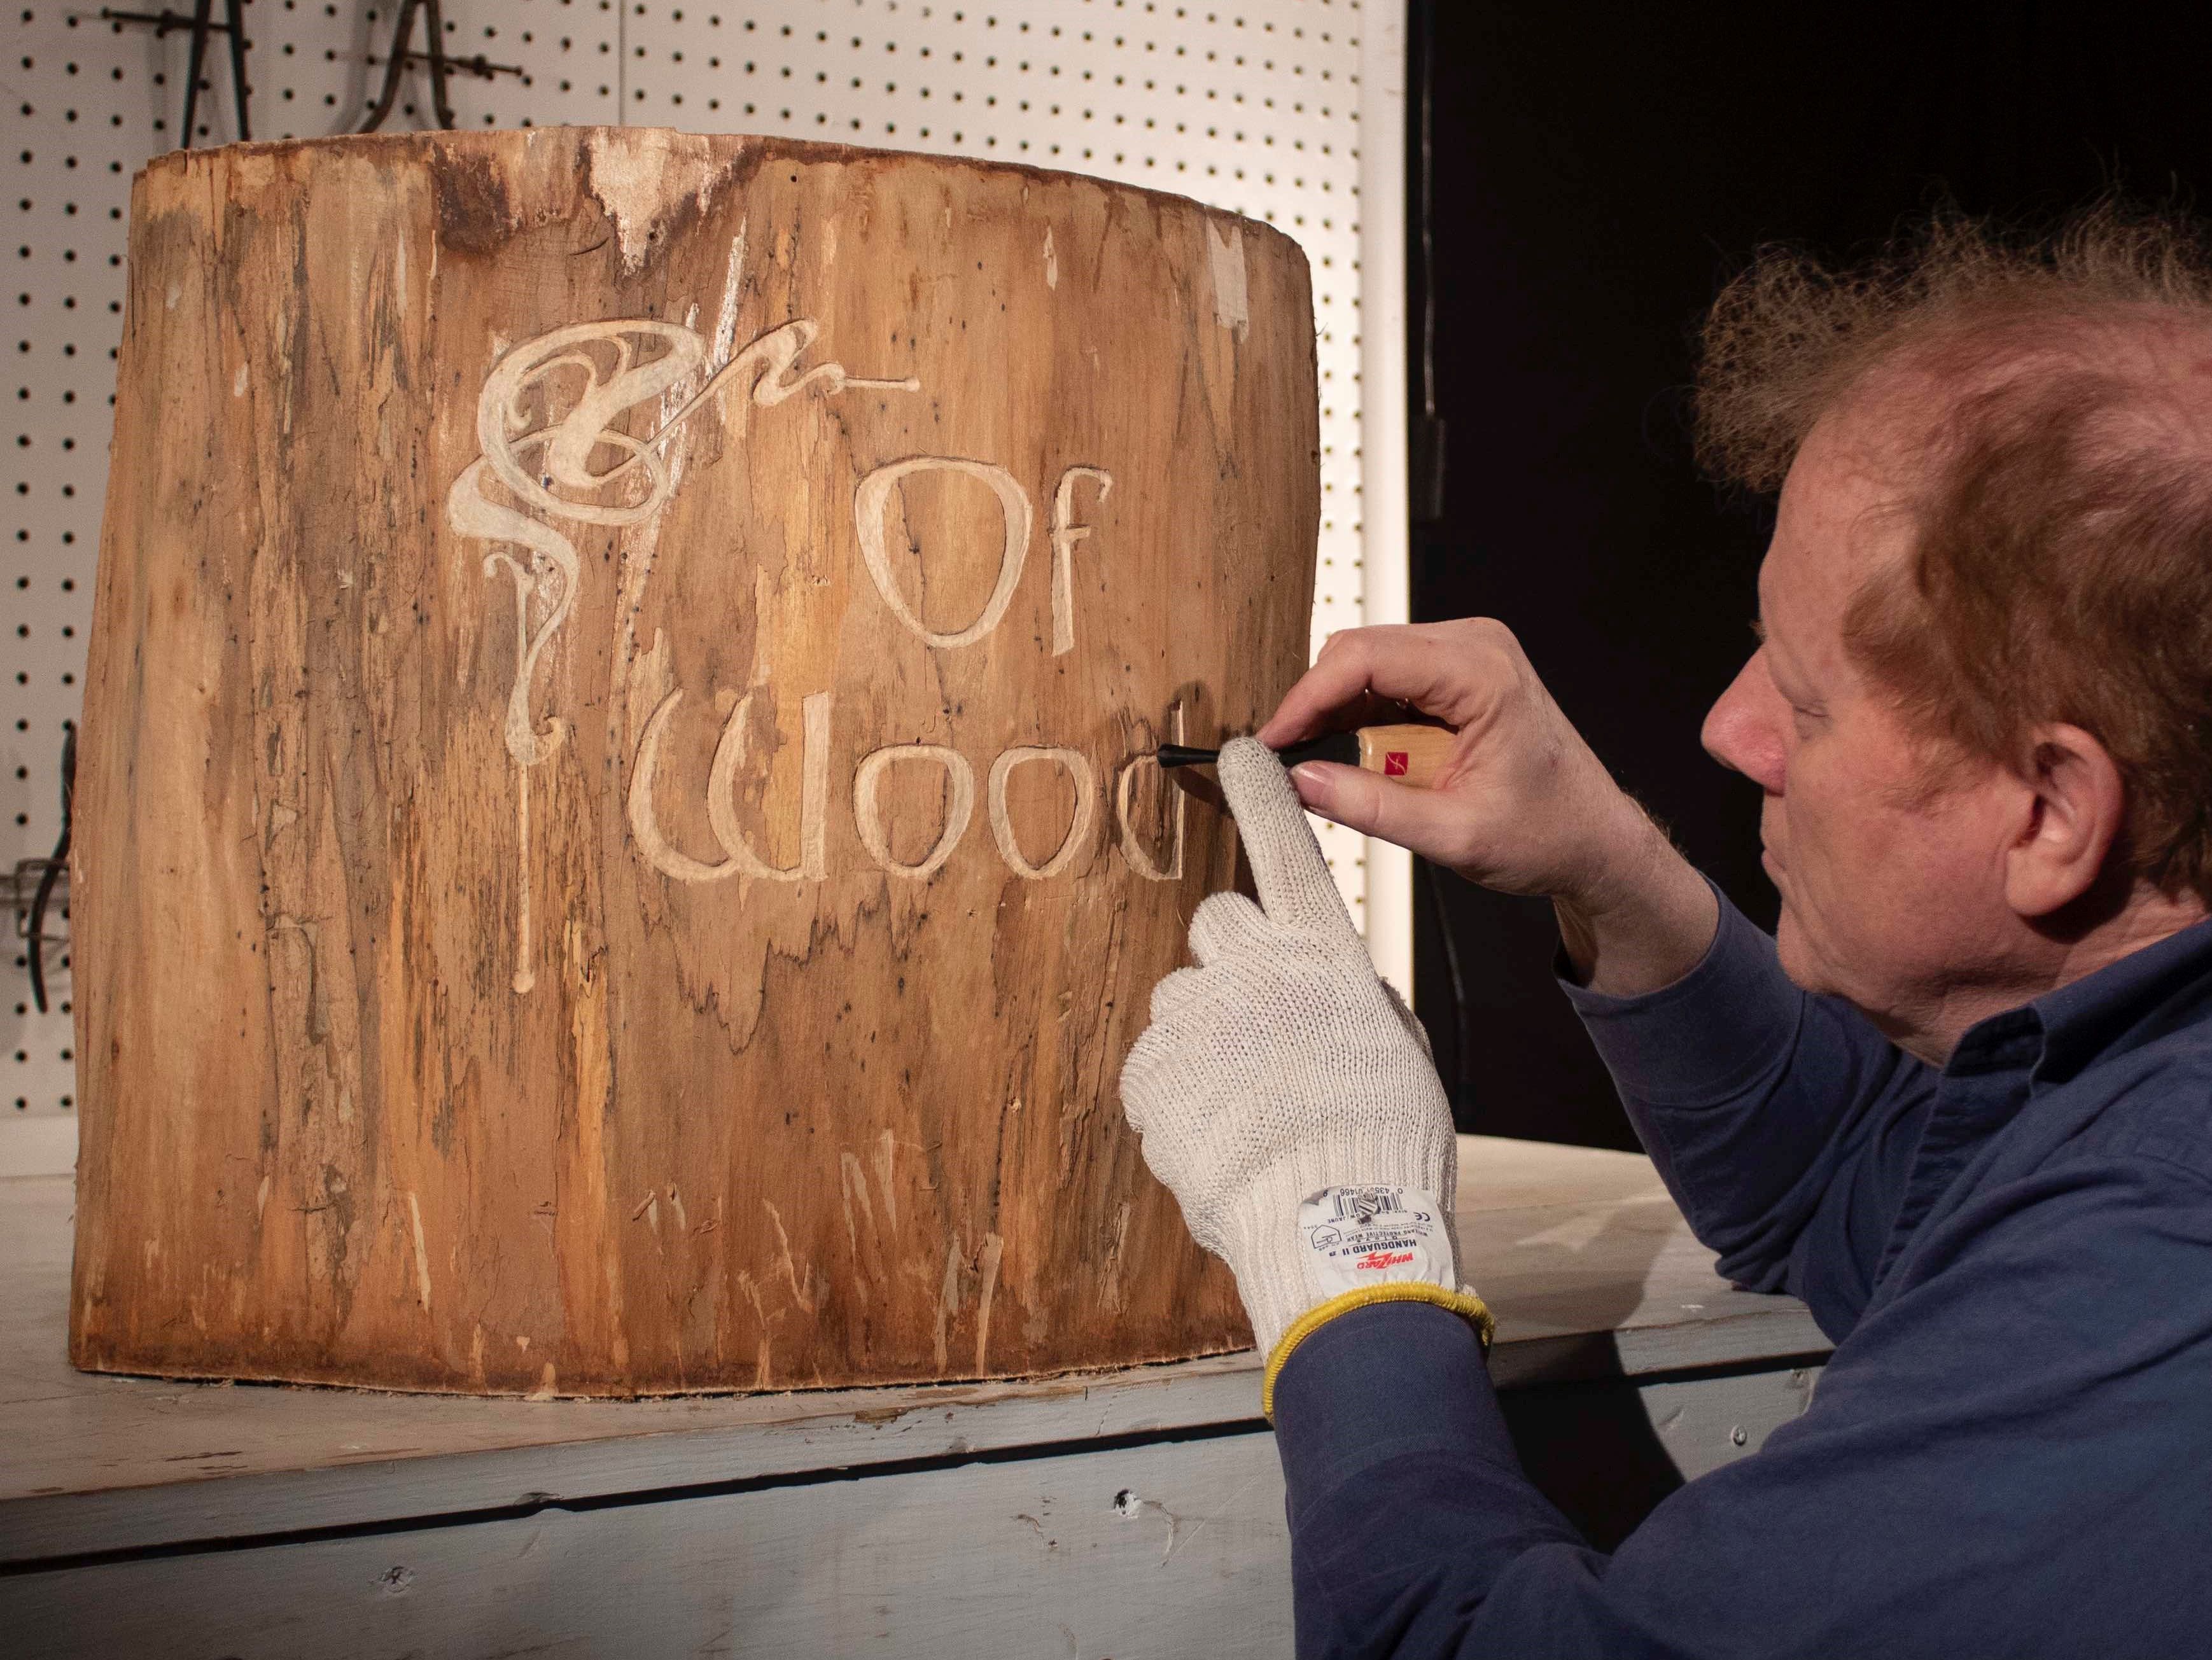 Stop Motion animator and Lecturer at UWM, Owen Klatte, working in his stop motion animated short film, "Of Wood"